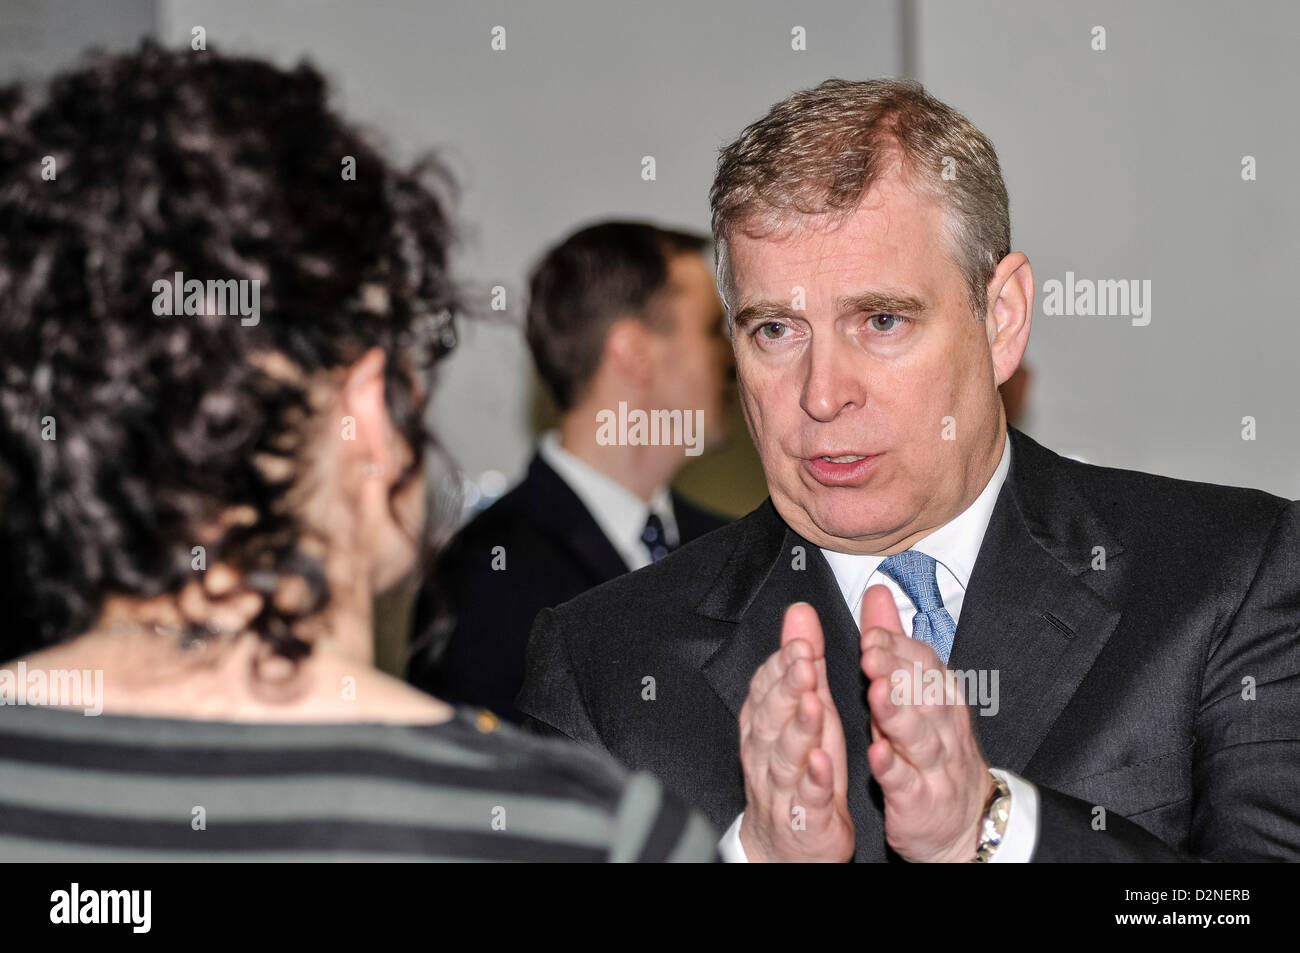 29th January 2013, Belfast, Northern Ireland. Prince Andrew, the Duke of York, talks to one of the innovators at the Northern Ireland Science Park Stock Photo